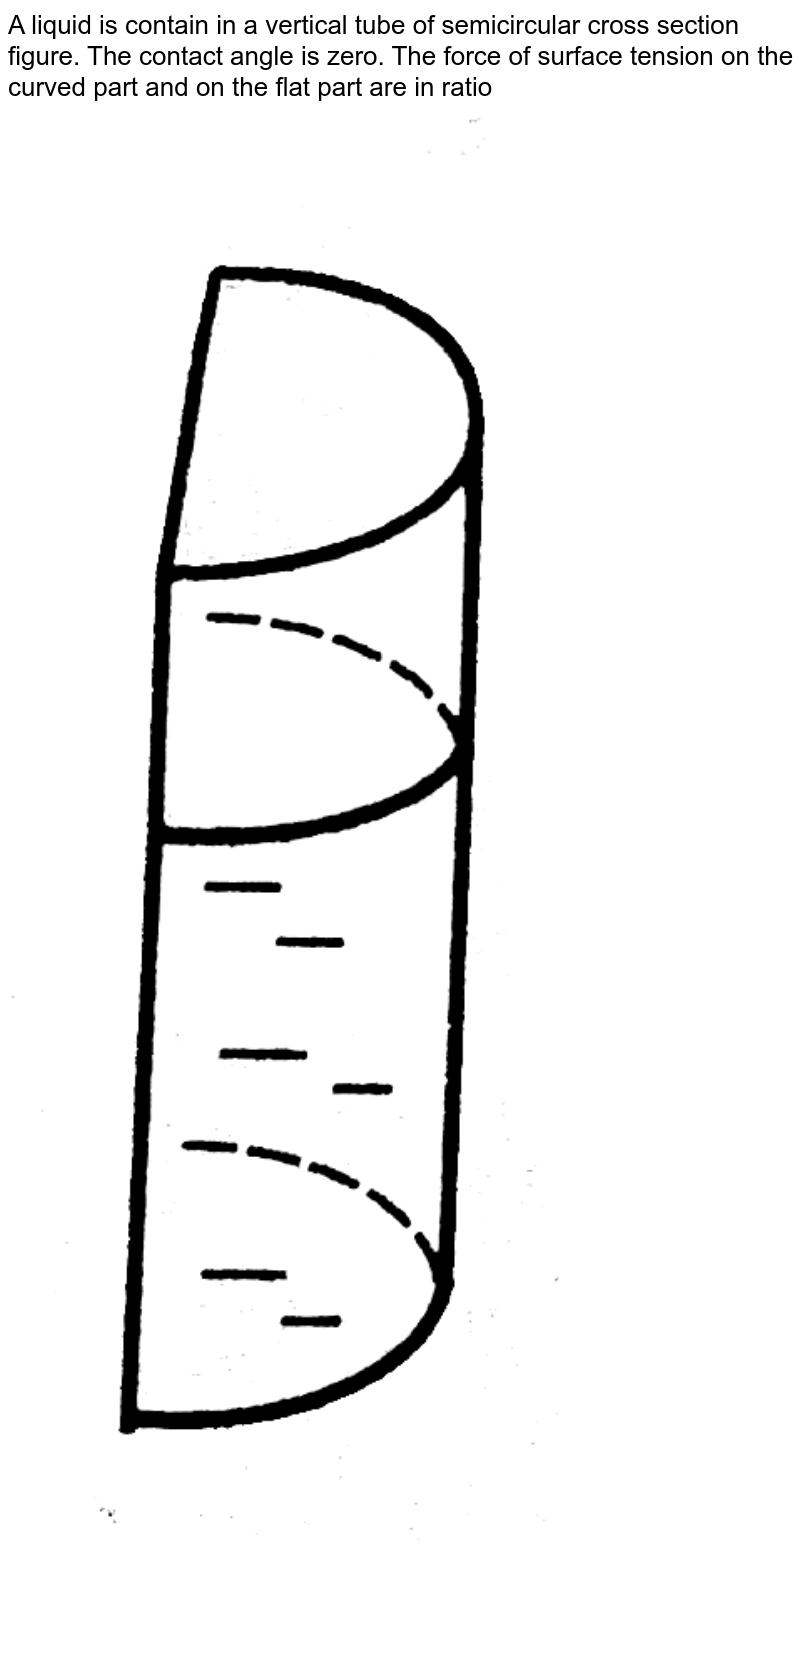 A liquid is contain in a vertical tube of semicircular cross section figure. The contact angle is zero. The force of surface tension on the curved part and on the flat part are in ratio <br> <img src="https://d10lpgp6xz60nq.cloudfront.net/physics_images/HCV_VOL1_C14_E01_052_Q01.png" width="80%">